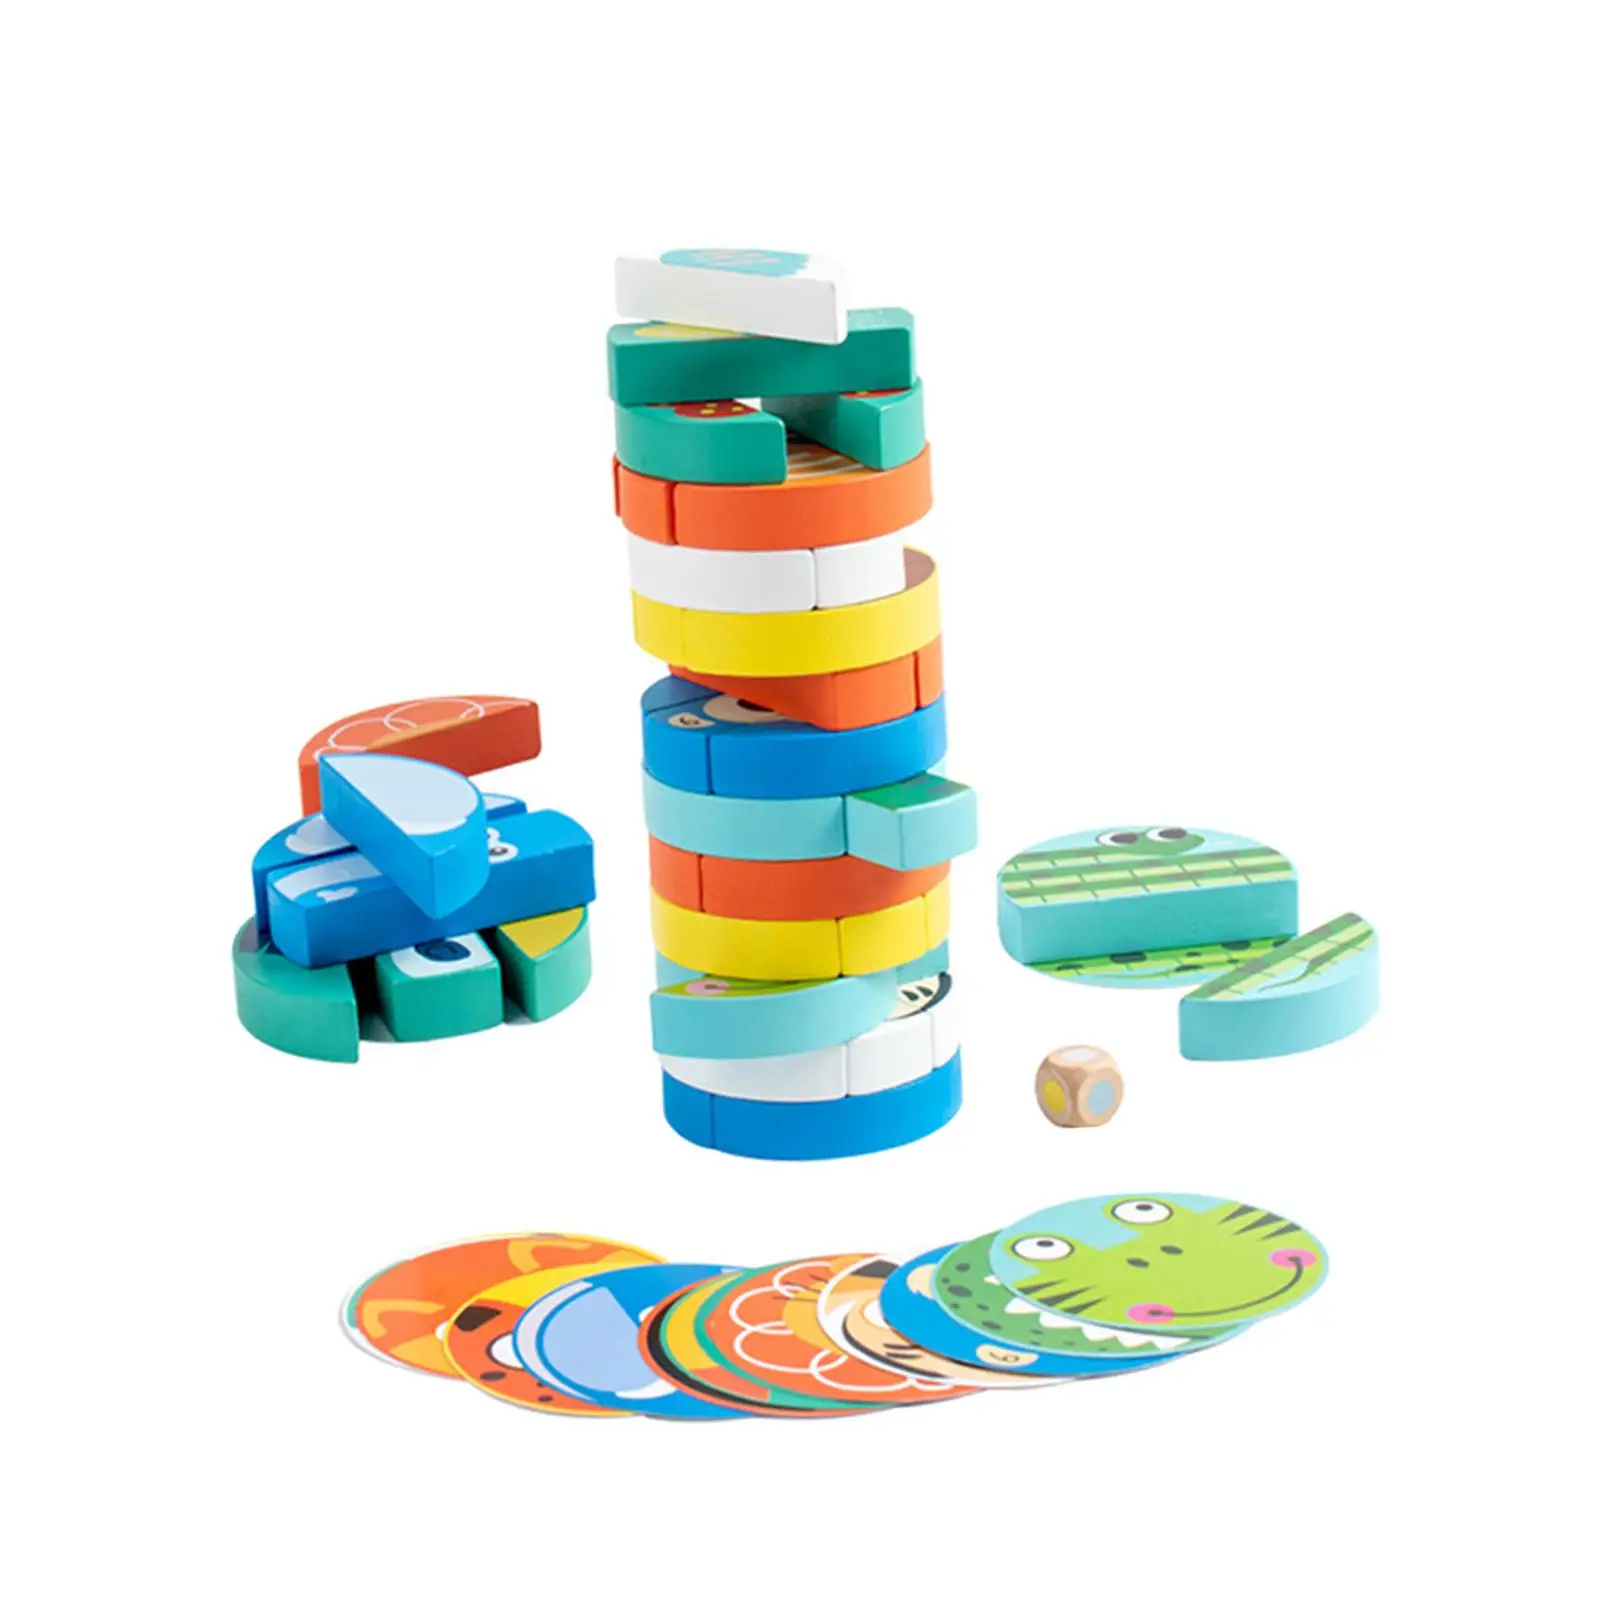 Wooden Blocks Stacking Game Cute Preschool Learning Tumble Towers Game Balancing Game Towers Building Puzzles for New Year Kids